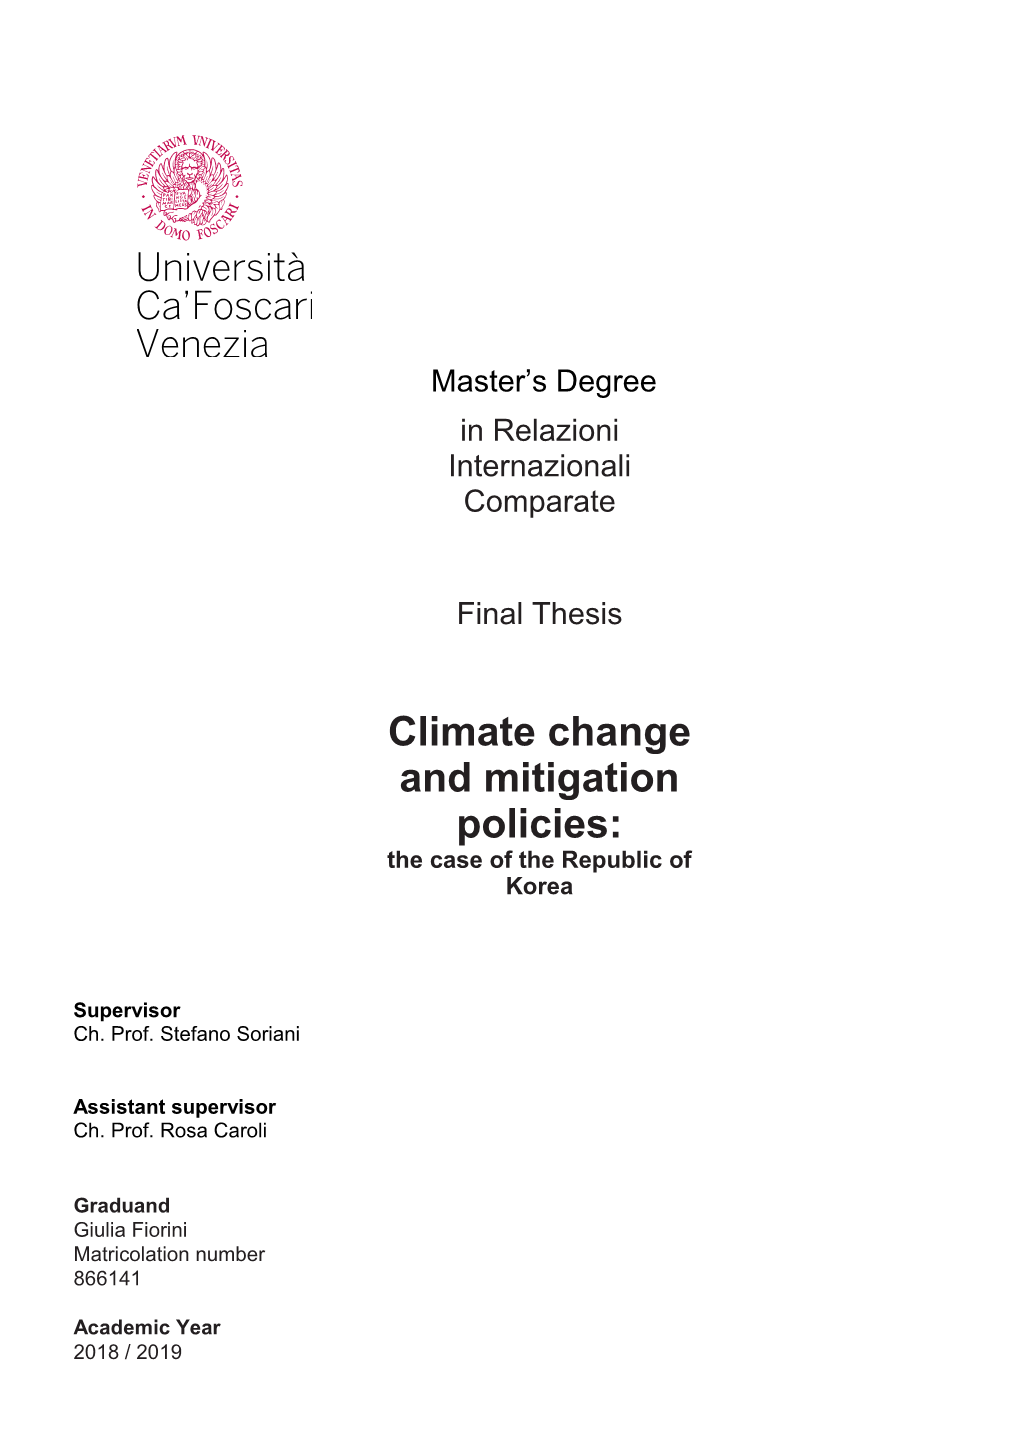 Climate Change and Mitigation Policies: the Case of the Republic of Korea